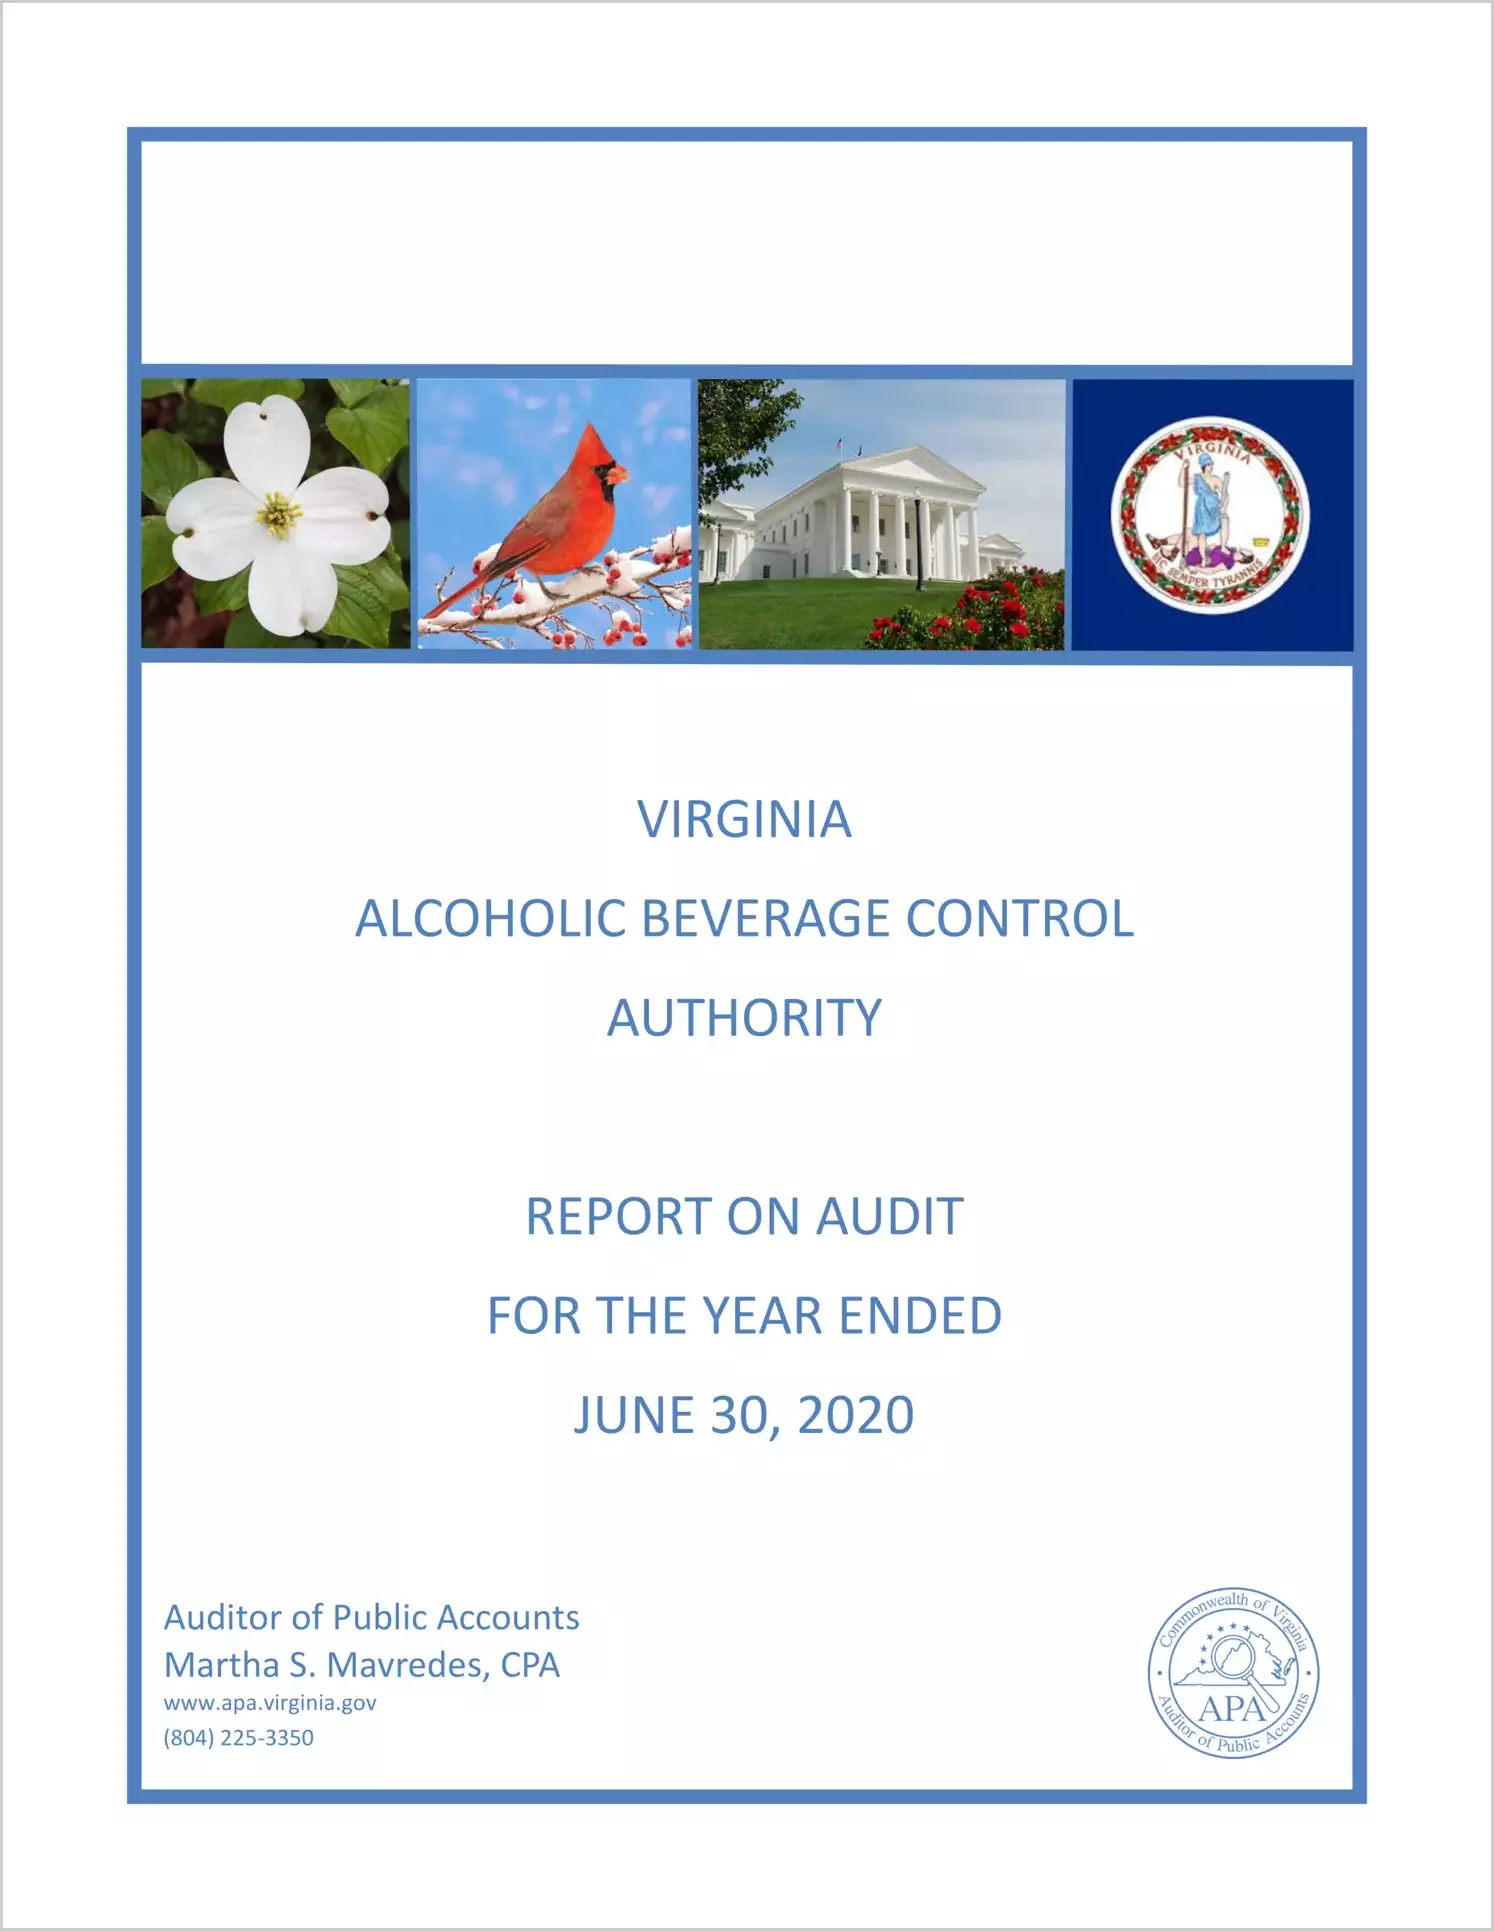 Virginia Alcoholic Beverage Control Authority for the year ended June 30, 2020